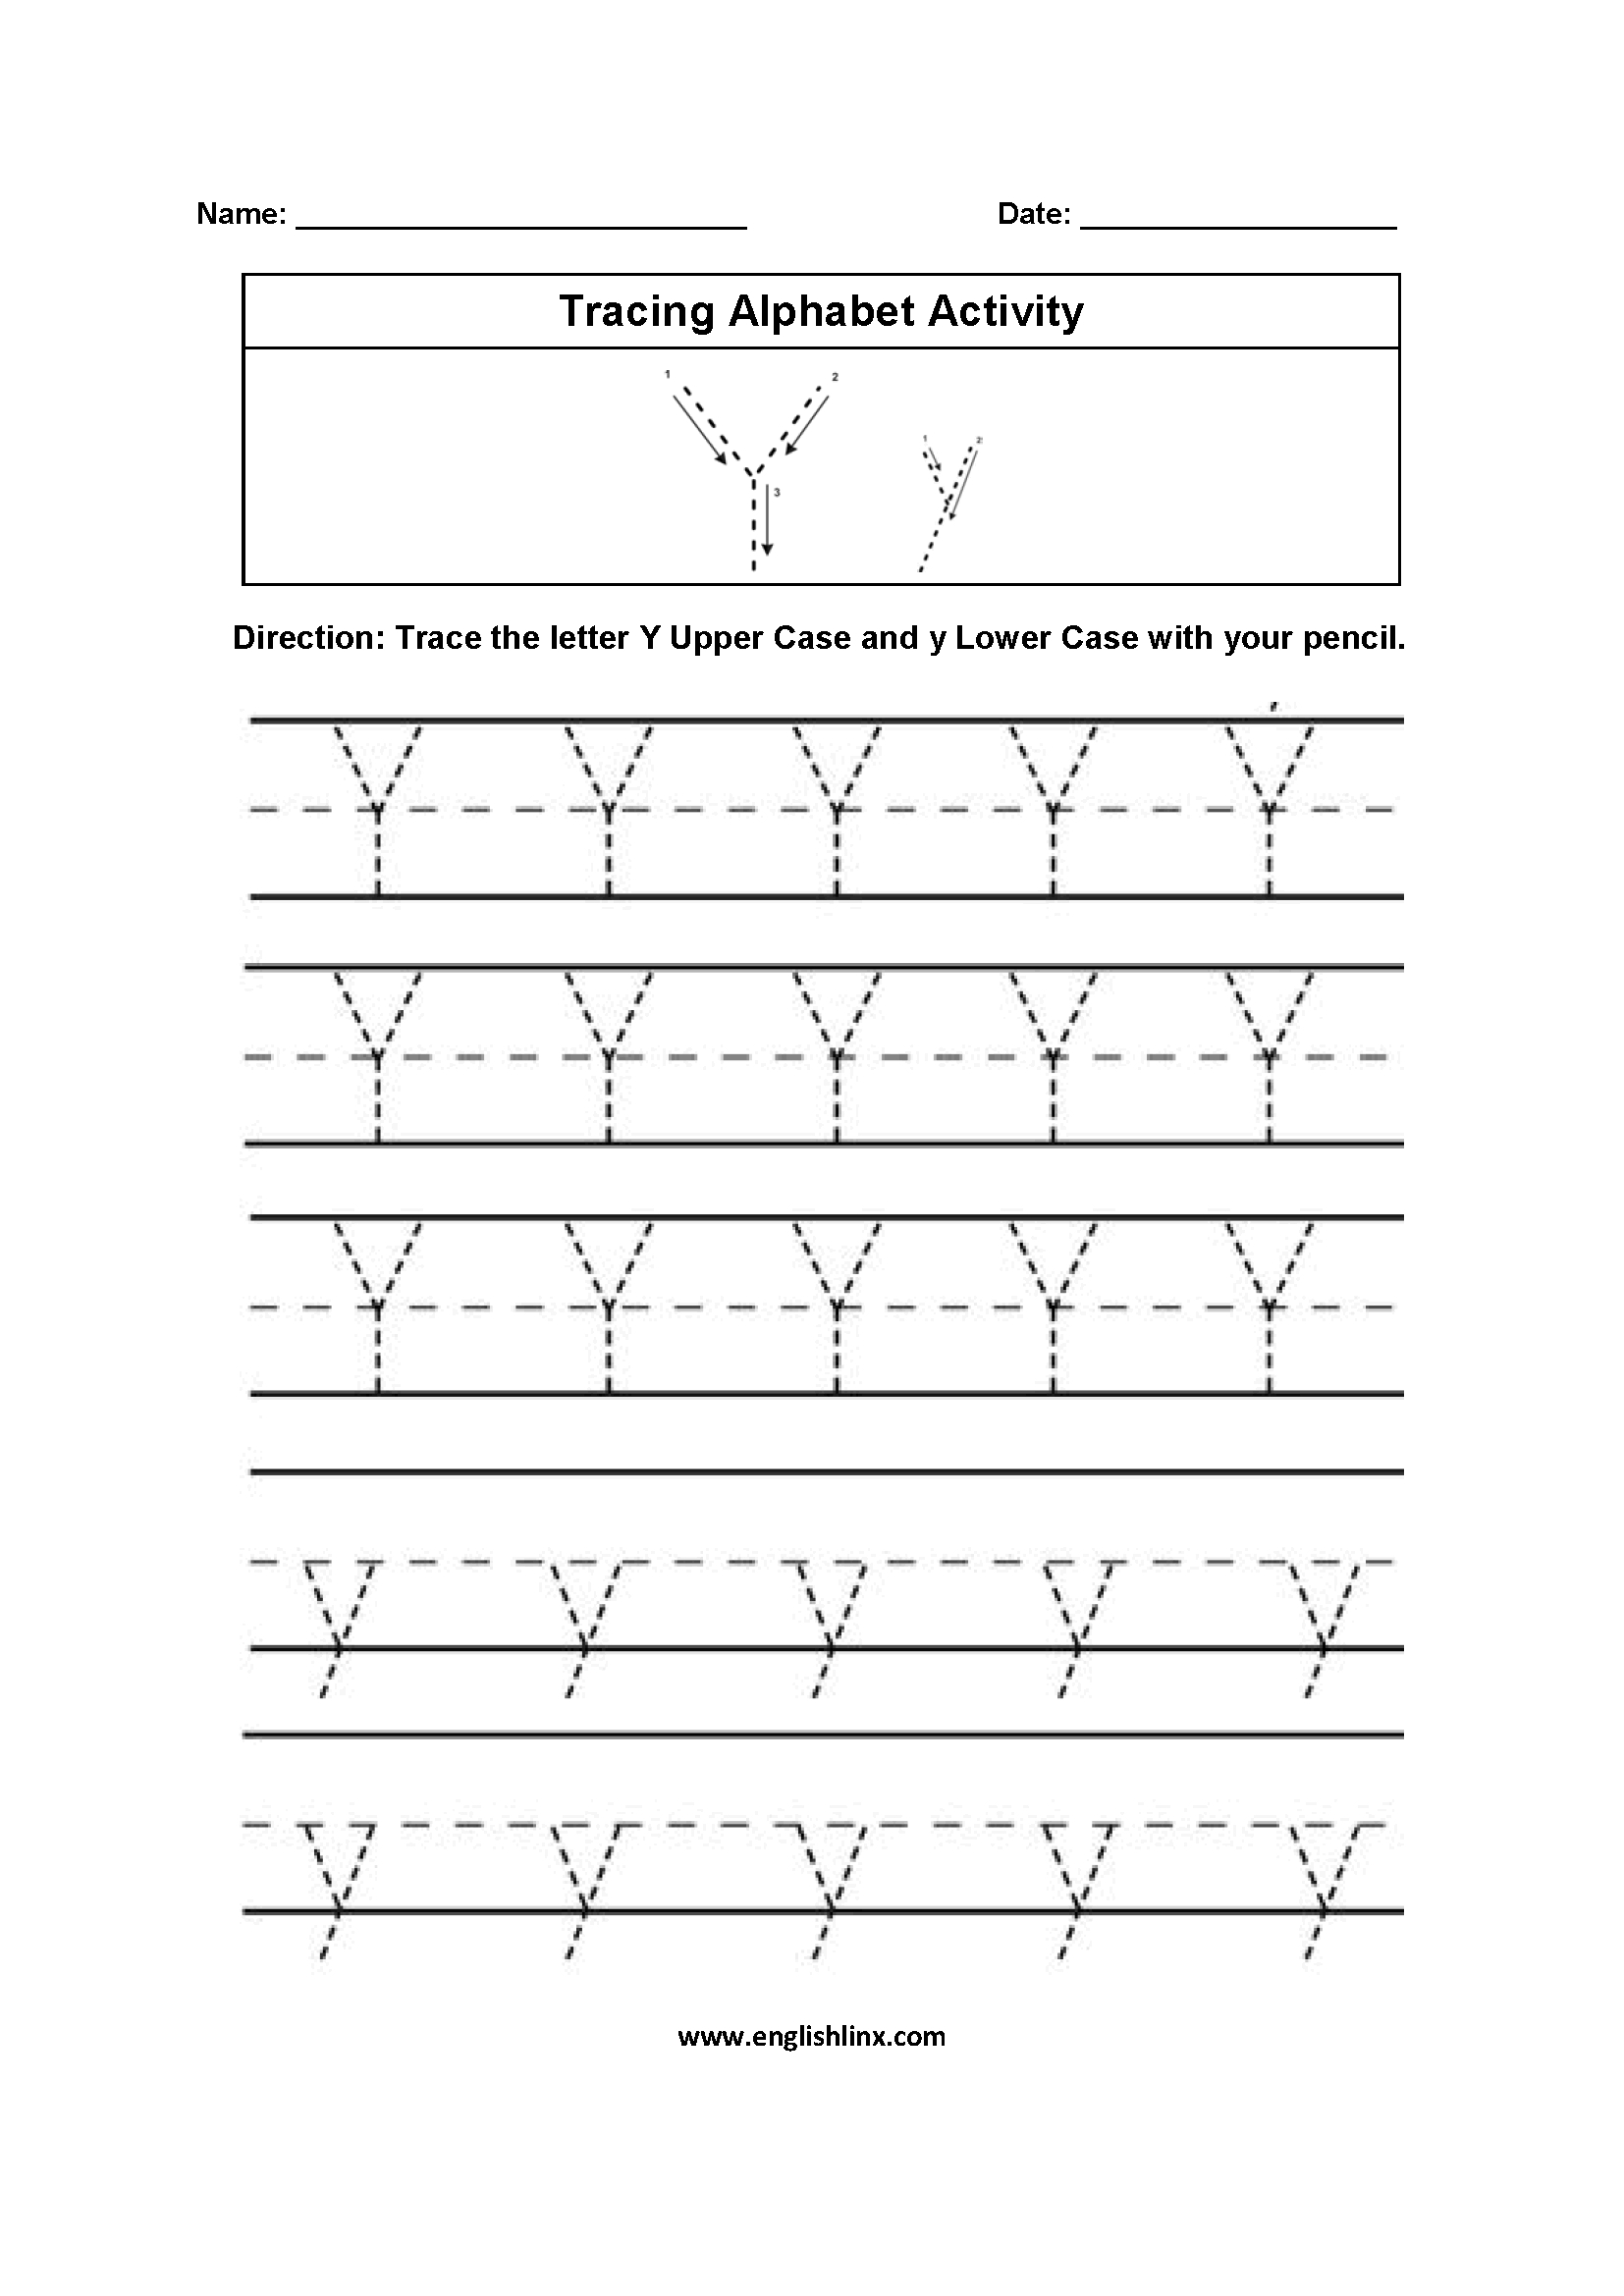 Writing Worksheets For Kids Trace And Write E2 80 93 within Tracing Letter Y Worksheets